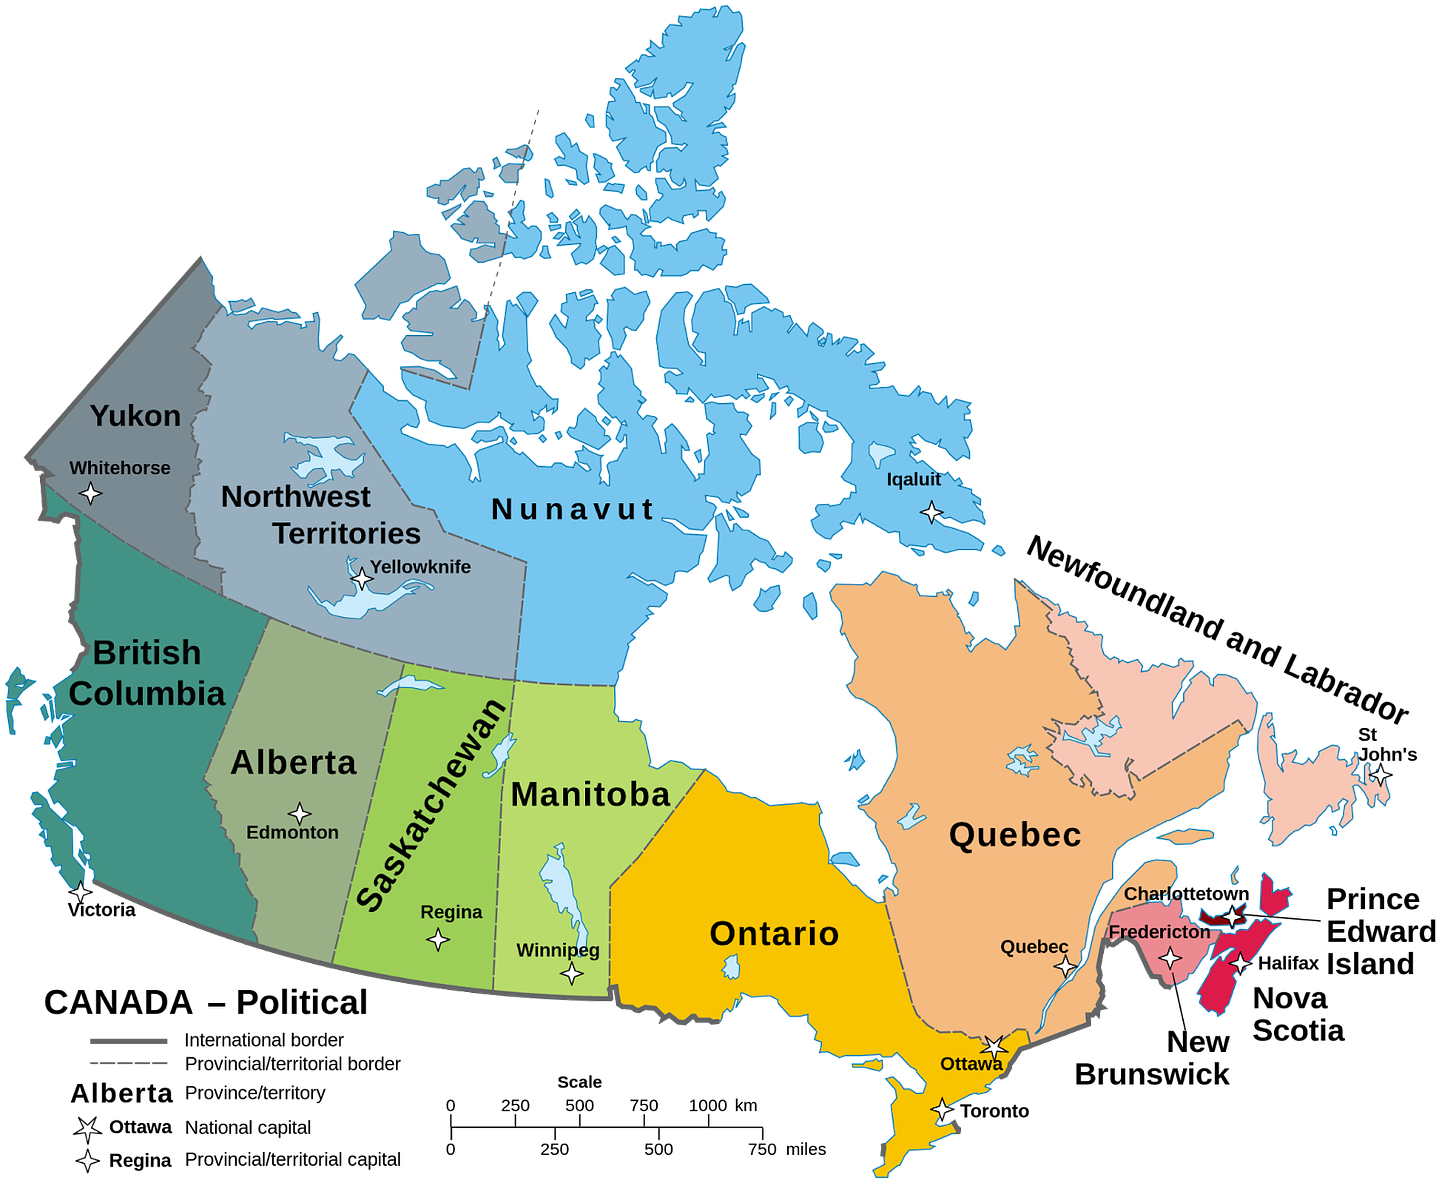 A colored map of Canada